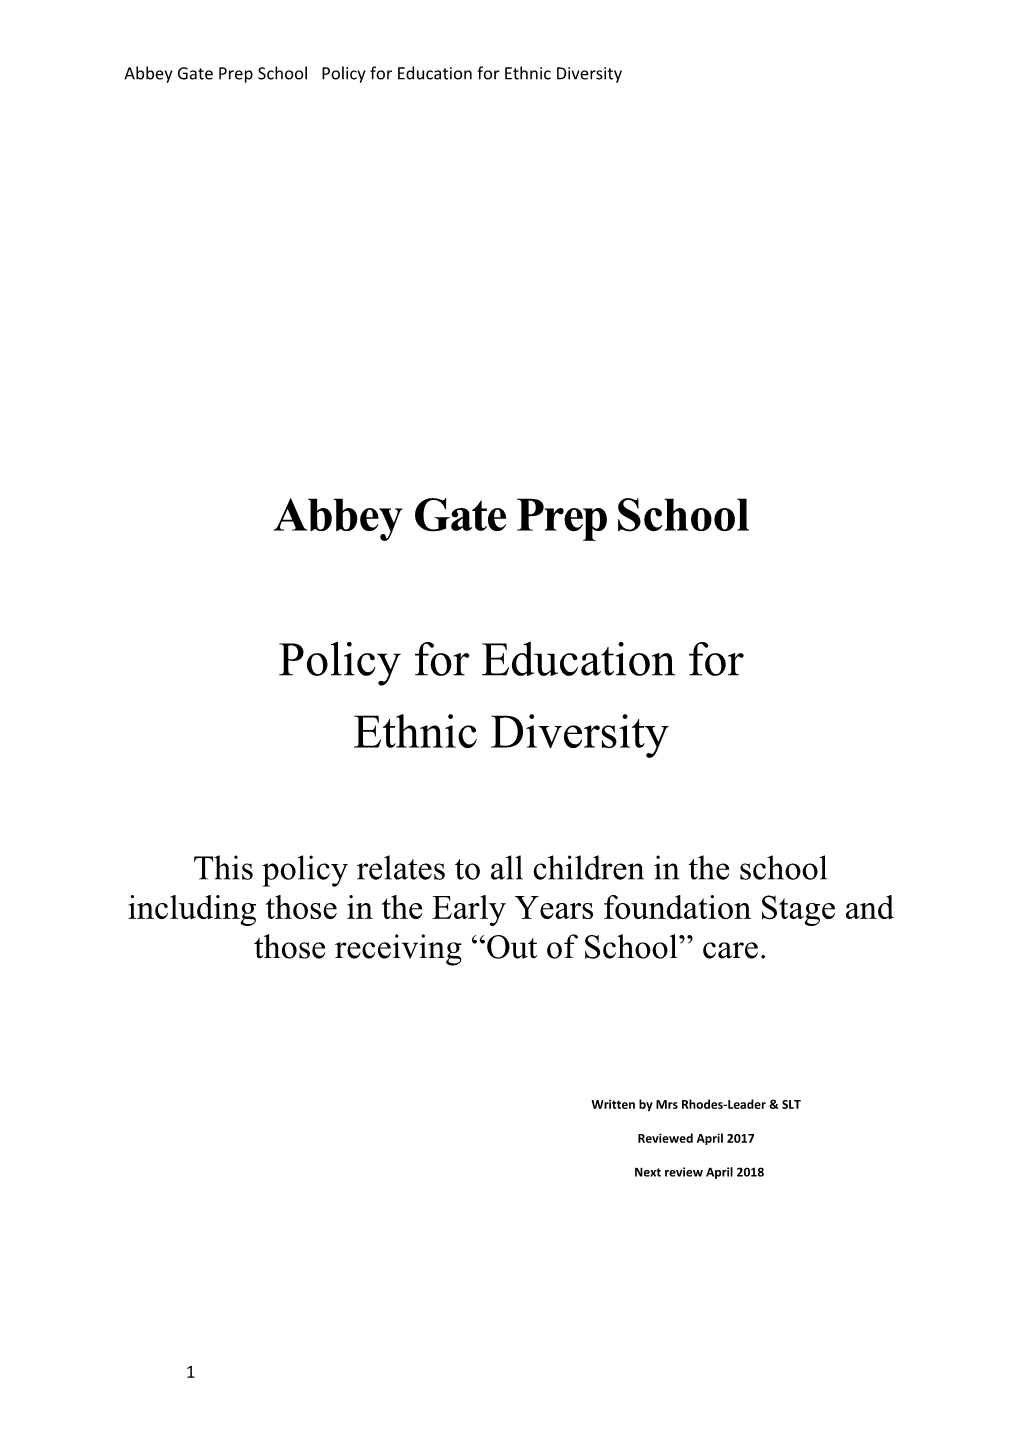 Abbey Gate Prep School Policy for Education for Ethnic Diversity